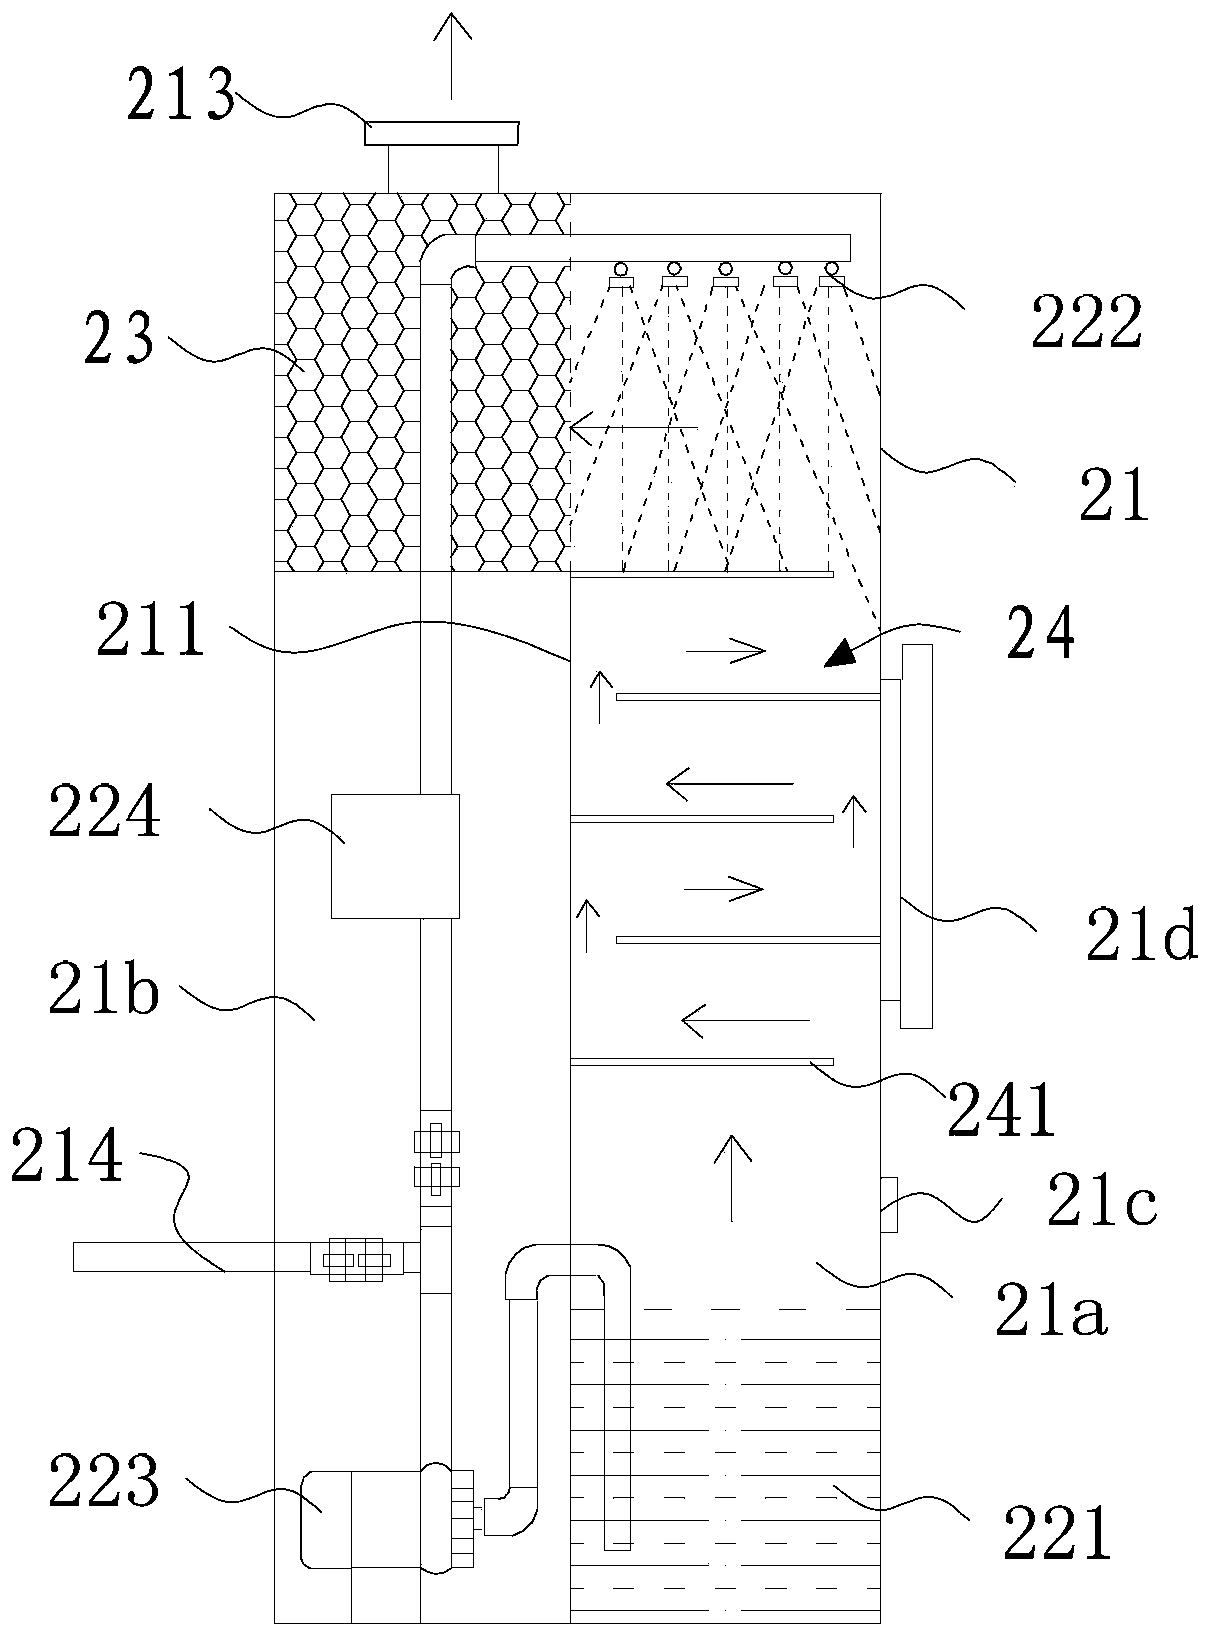 Waste gas and dust treating device